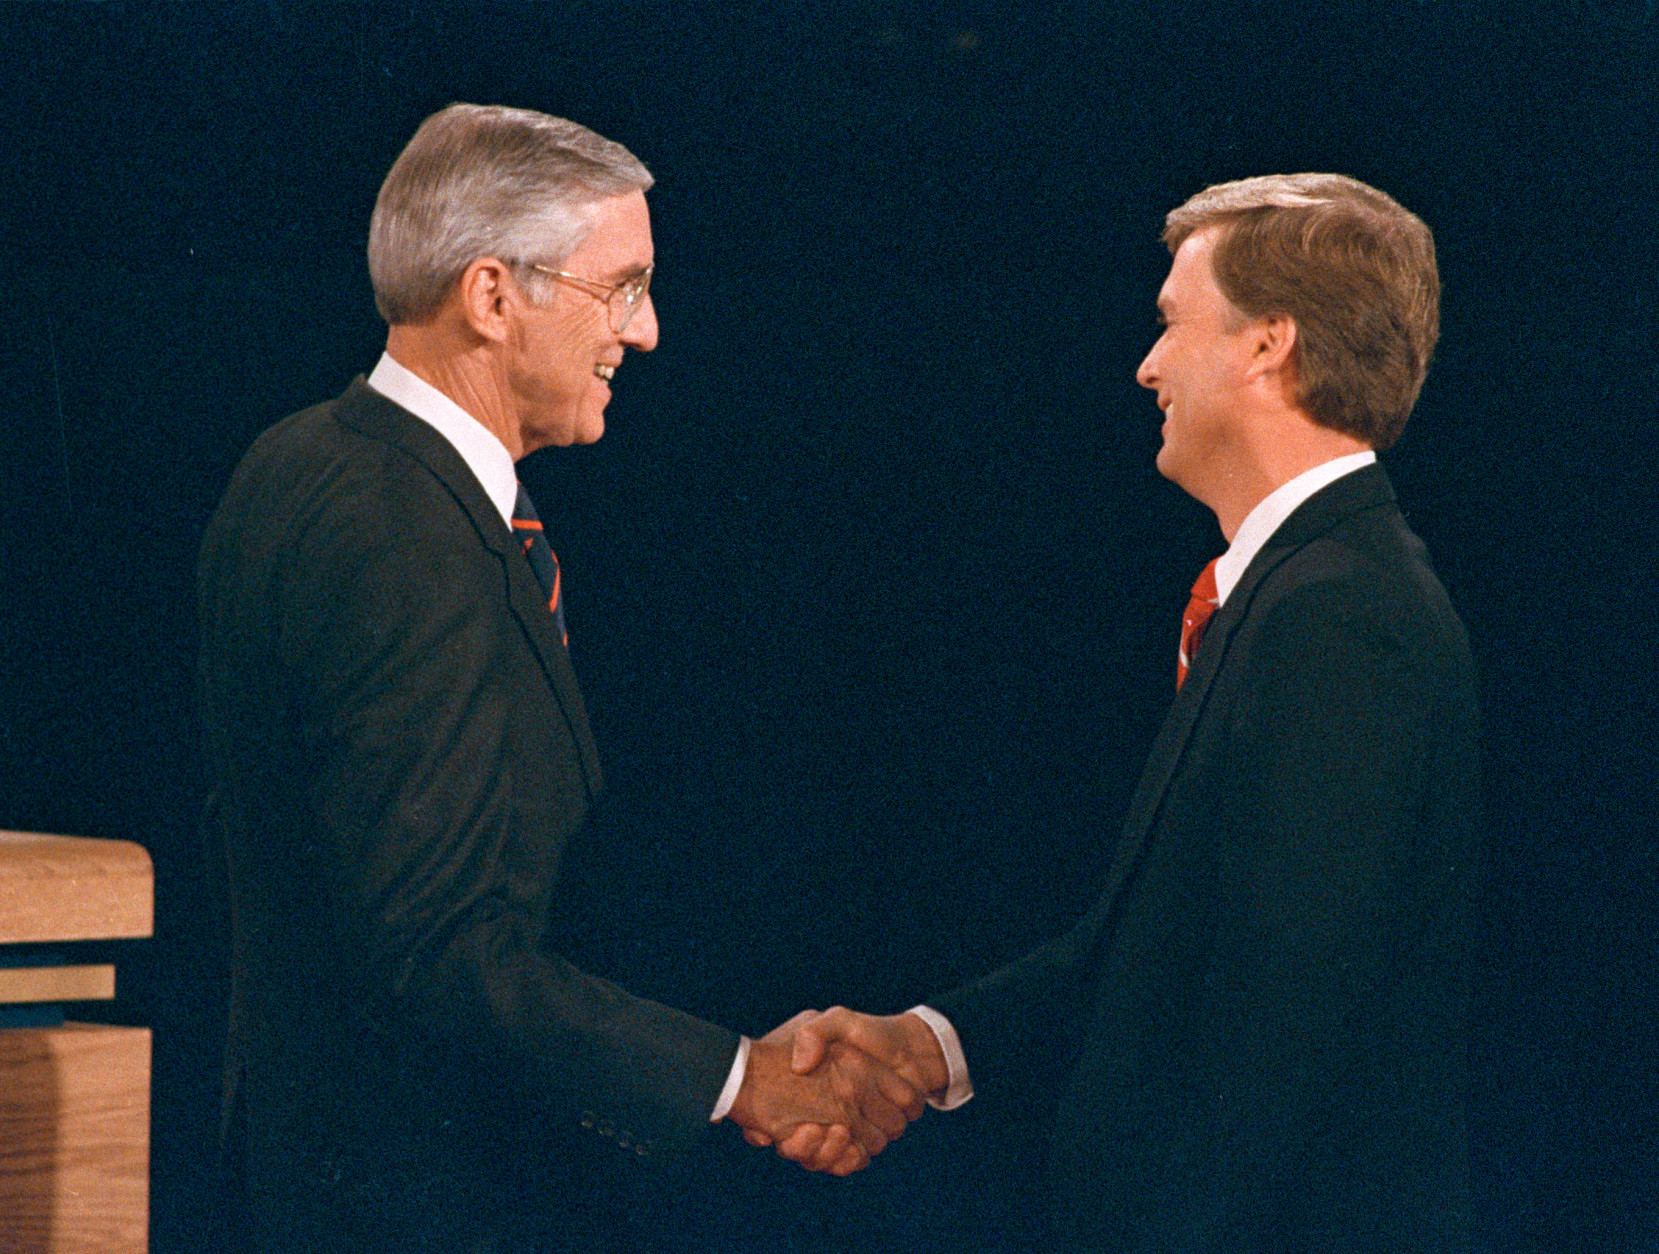 FILE - In this Oct. 5, 1988, file photo, Sen. Lloyd Bentsen, D-Texas, left, shakes hands with Sen. Dan Quayle, R-Ind., before the start of their vice presidential debate at the Omaha Civic Auditorium, Omaha, Neb. They spend hours mastering policy. Learning to lean on the podium just so. Perfecting the best way to label their opponents as liars without whining. But presidential candidates and their running mates often find that campaign debates turn on unplanned zingers, gaffes or gestures that speak volumes. Debate wins and losses often are scored based on the overall impressions that candidates leave with voters. In the history books, though, small debate moments often end up telling the broader story. (AP Photo/Ron Edmonds)